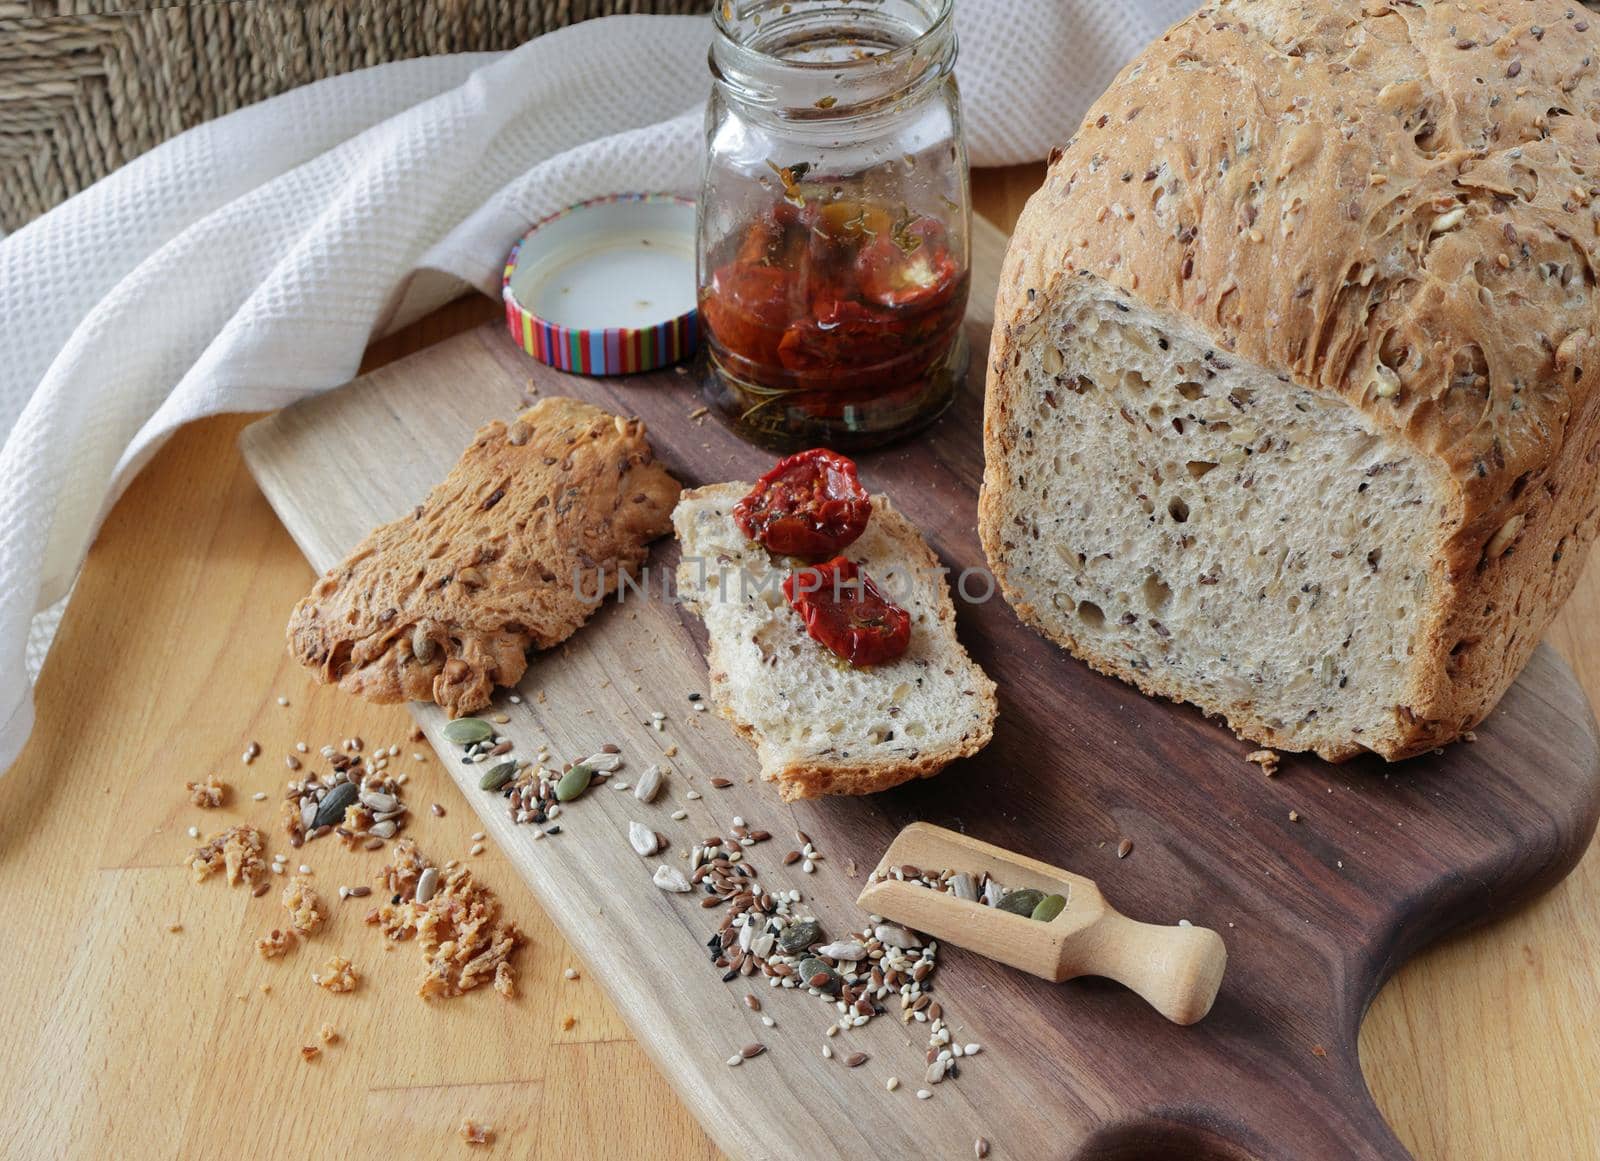 loaf of homemade whole grain bread and a cut slice of bread on a wooden cutting board. A mixture of seeds and whole grains. A jar of sun-dried tomatoes on a crust of fresh bread. Healthy food concept by Proxima13